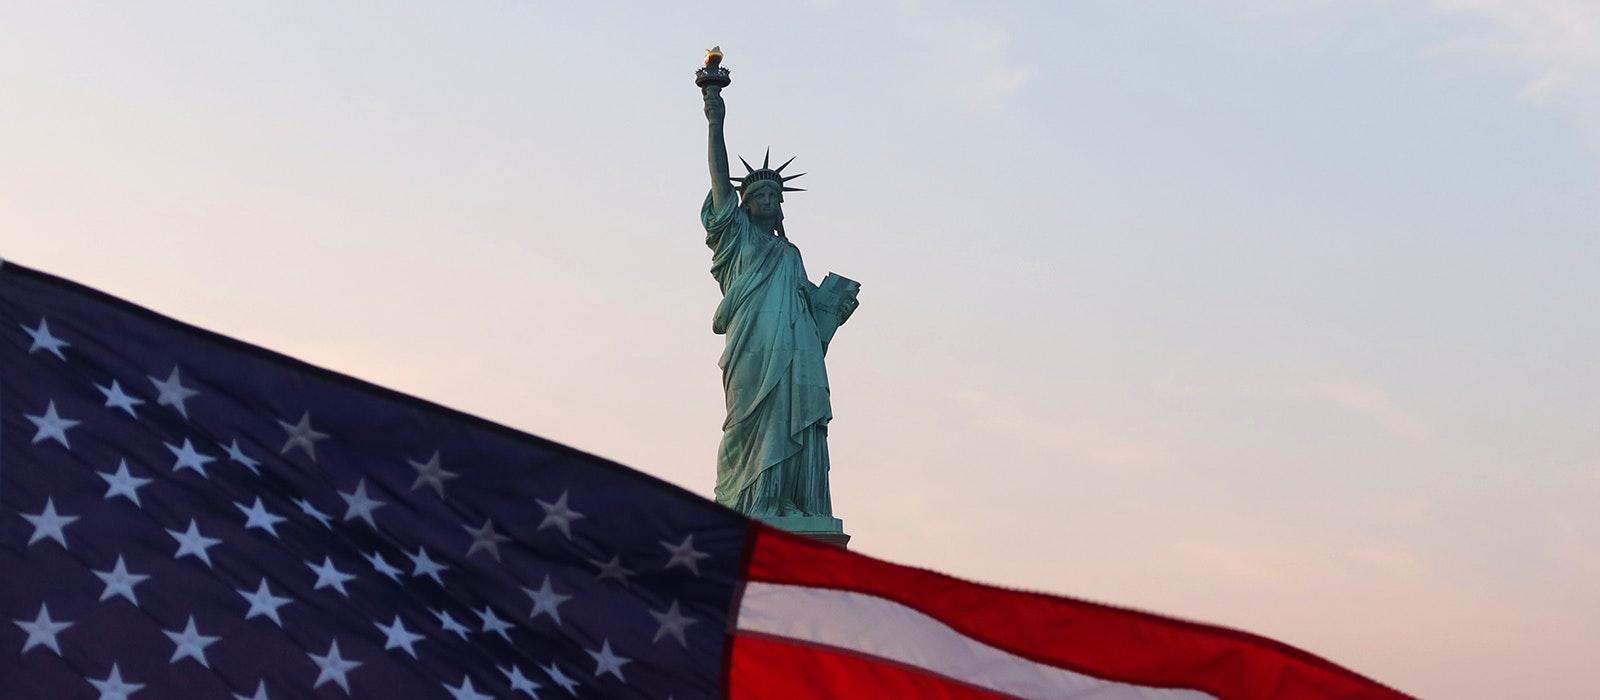 An American flag flies on the back of a boat as the sun sets behind the Statue of Liberty on September 18, 2022, in New York City